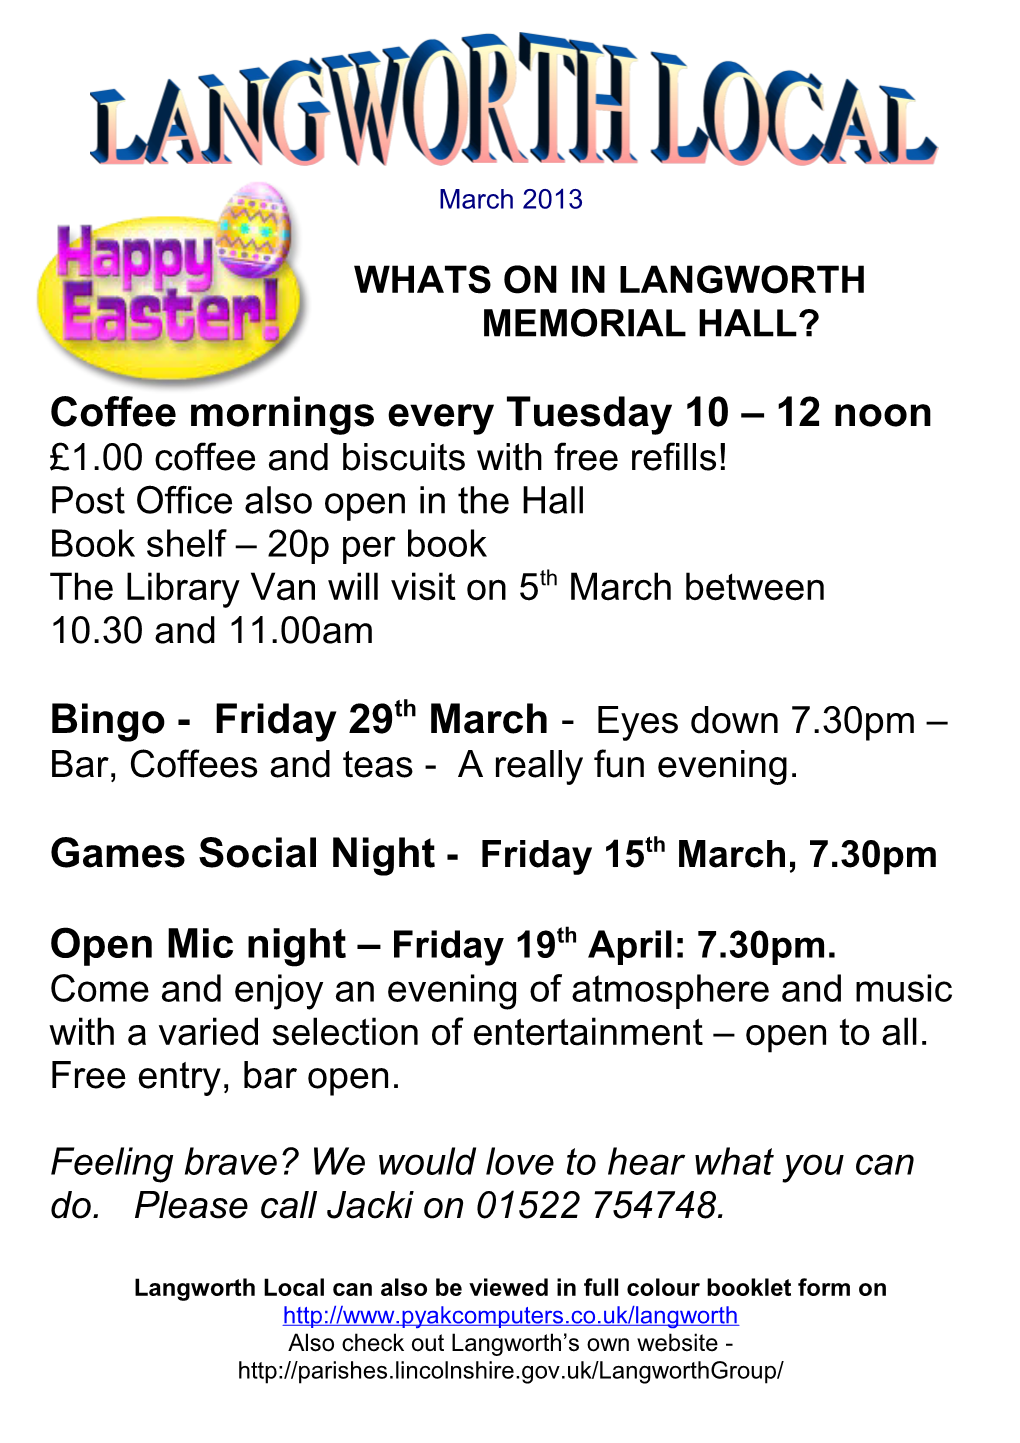 Whats on in Langworth Memorial Hall?